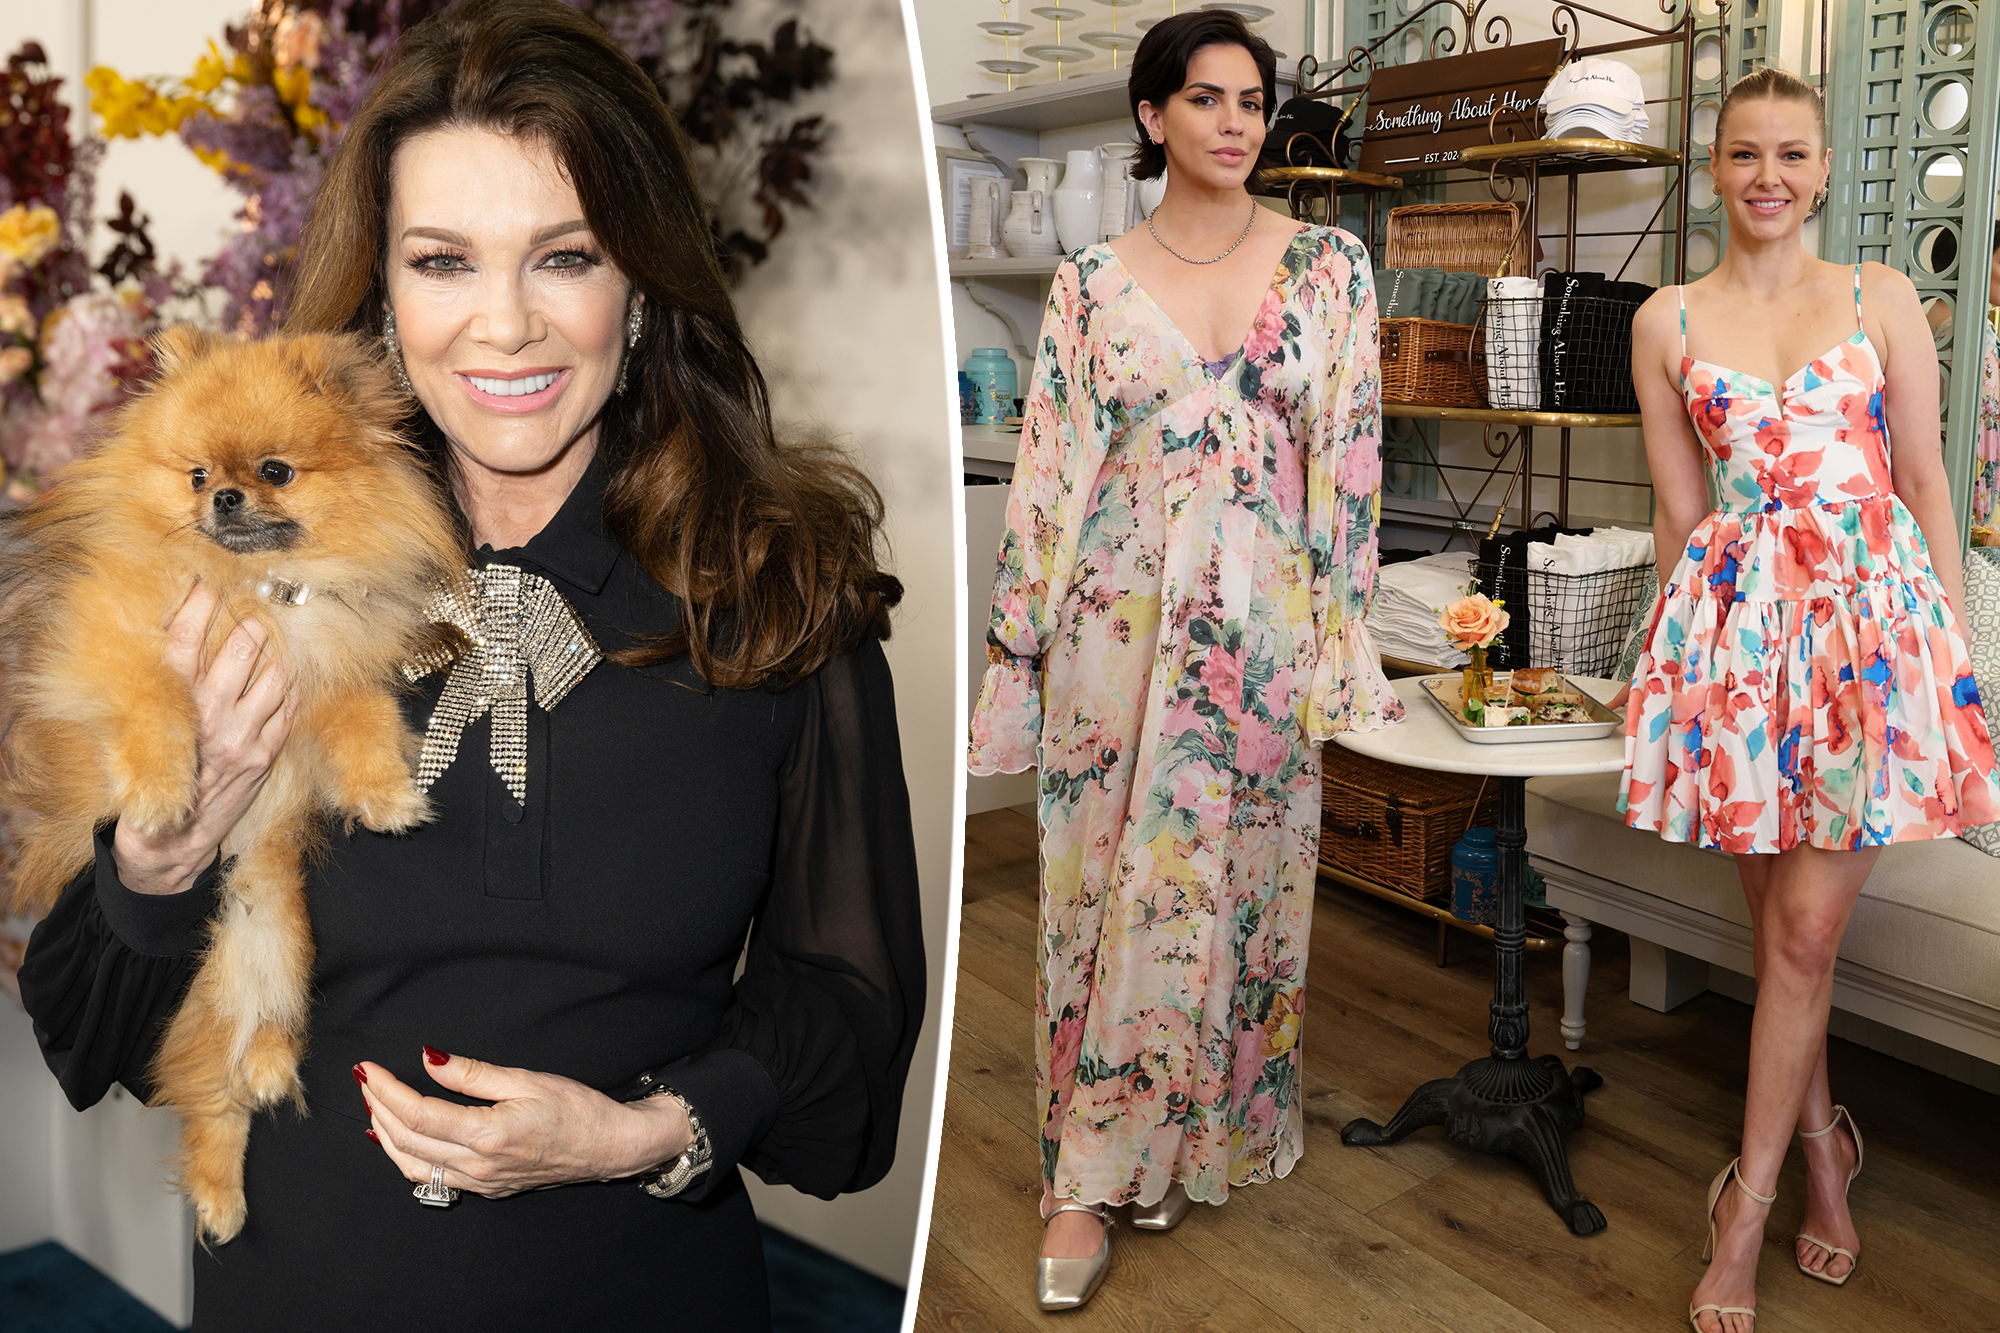 Lisa Vanderpump's Approach to Business and Friendship